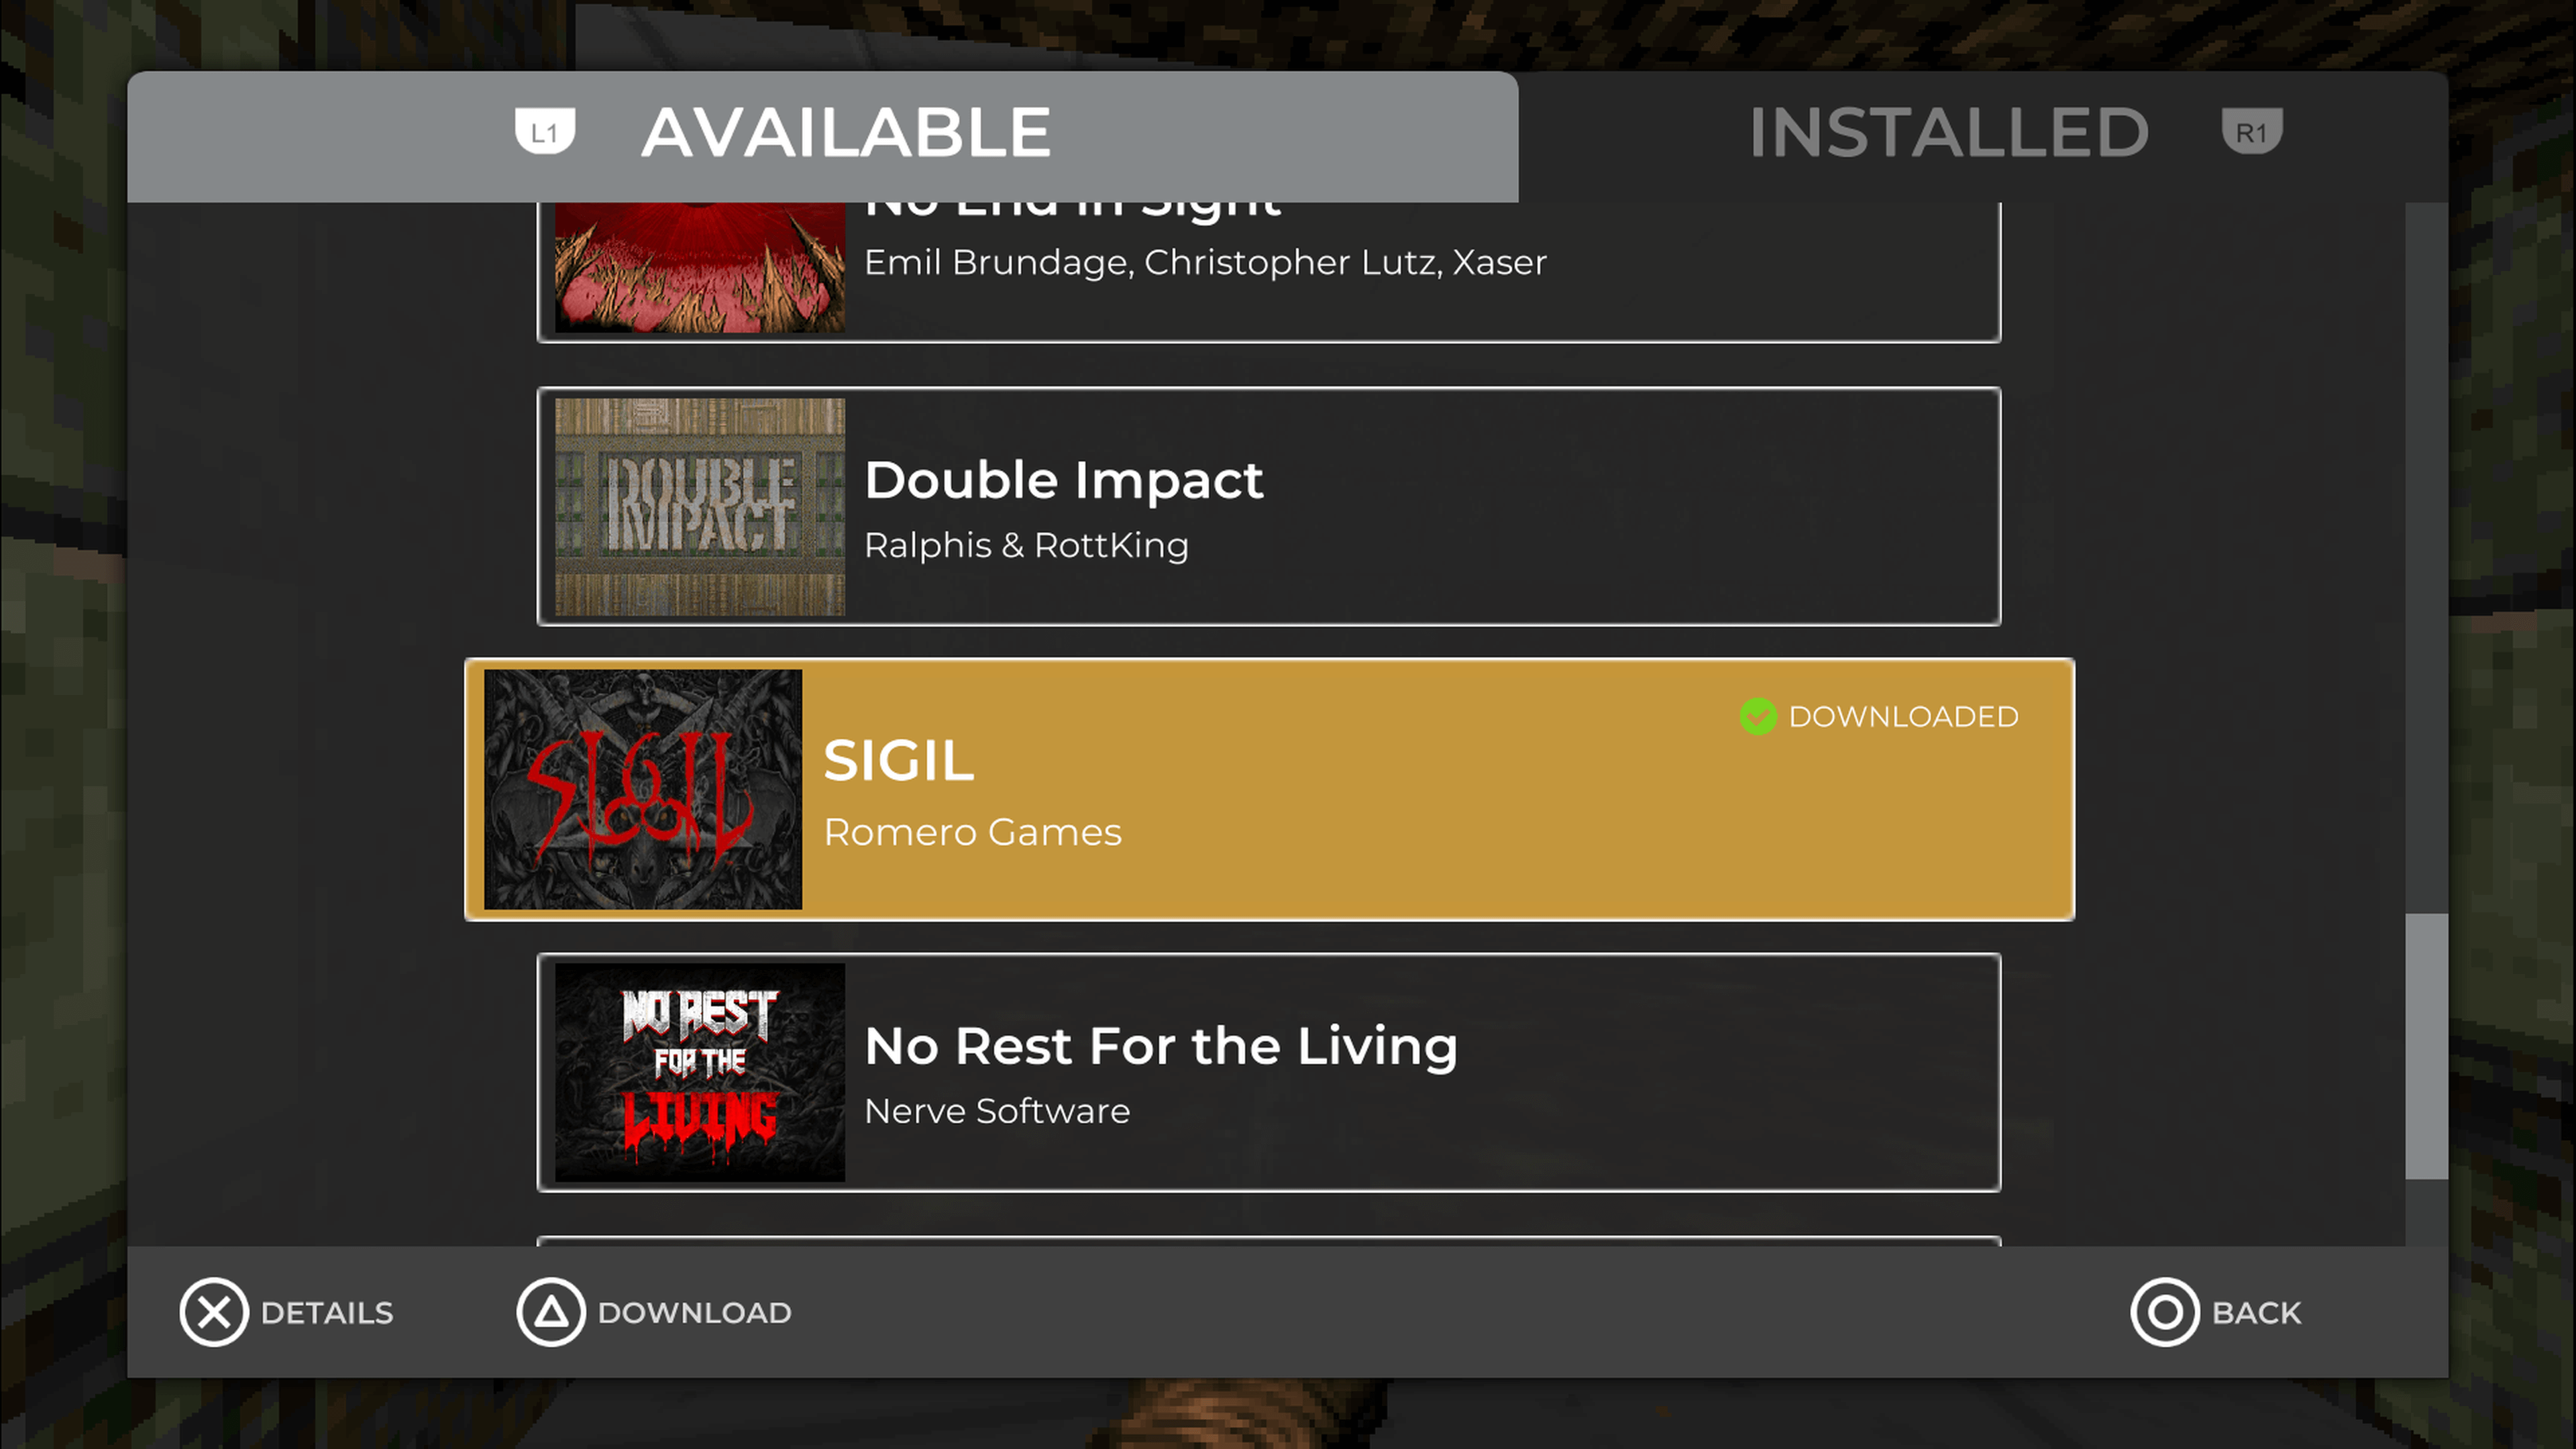 add-on menu screen in classic videogame Doom showing Romero Games add-on Sigil which is denoted on the right as downloaded